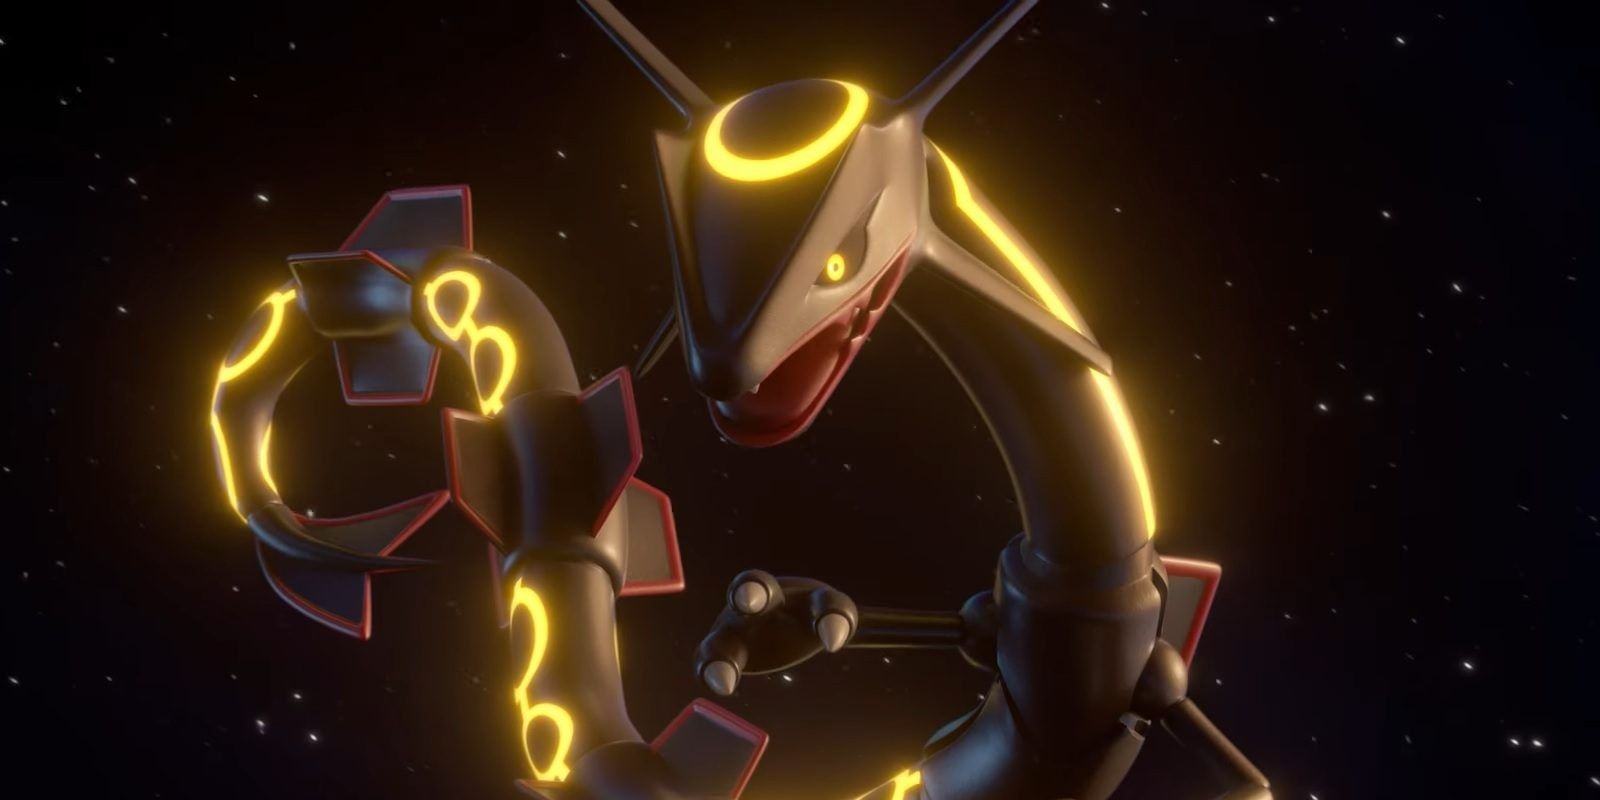 A Shiny Rayquaza, as seen in a teaser trailer for Pokémon GO.